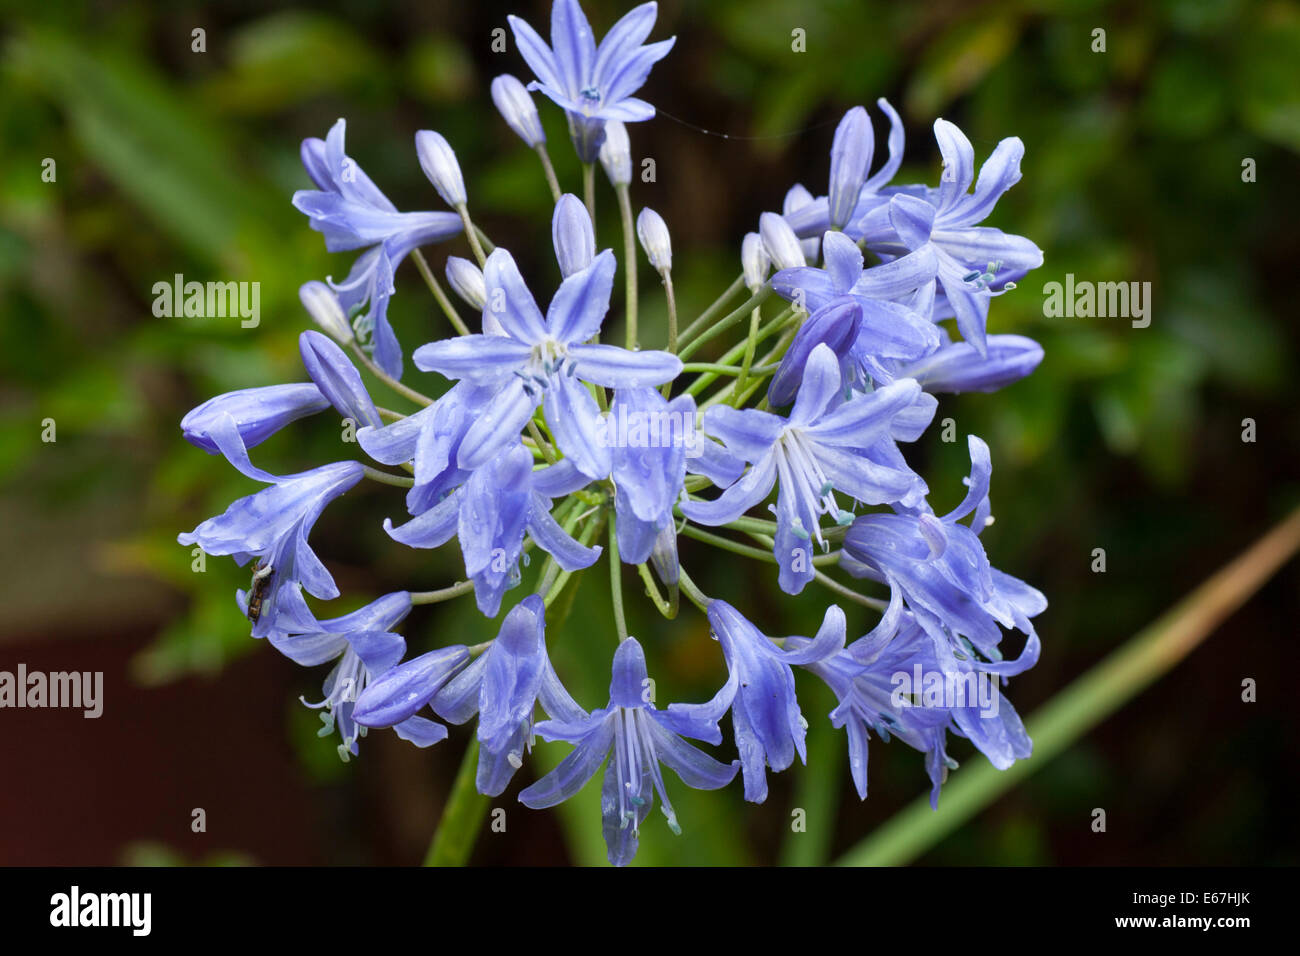 Open flowers and closed buds in a head of Agapanthus 'Bressingham Blue' Stock Photo